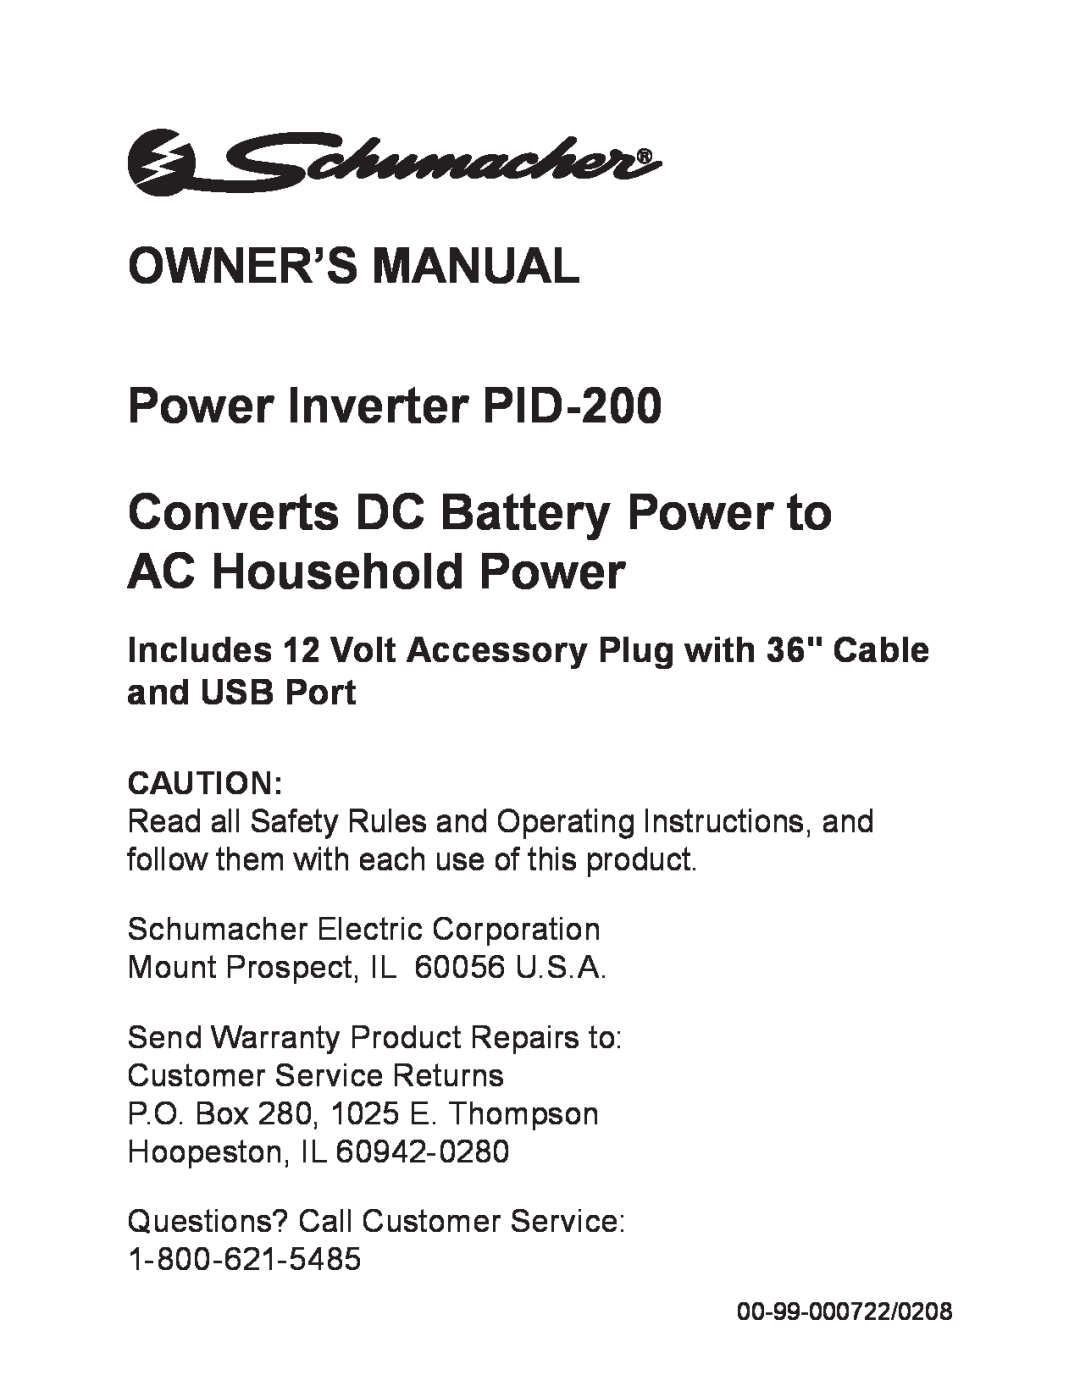 Schumacher PID-200 owner manual Includes 12 Volt Accessory Plug with 36 Cable and USB Port 